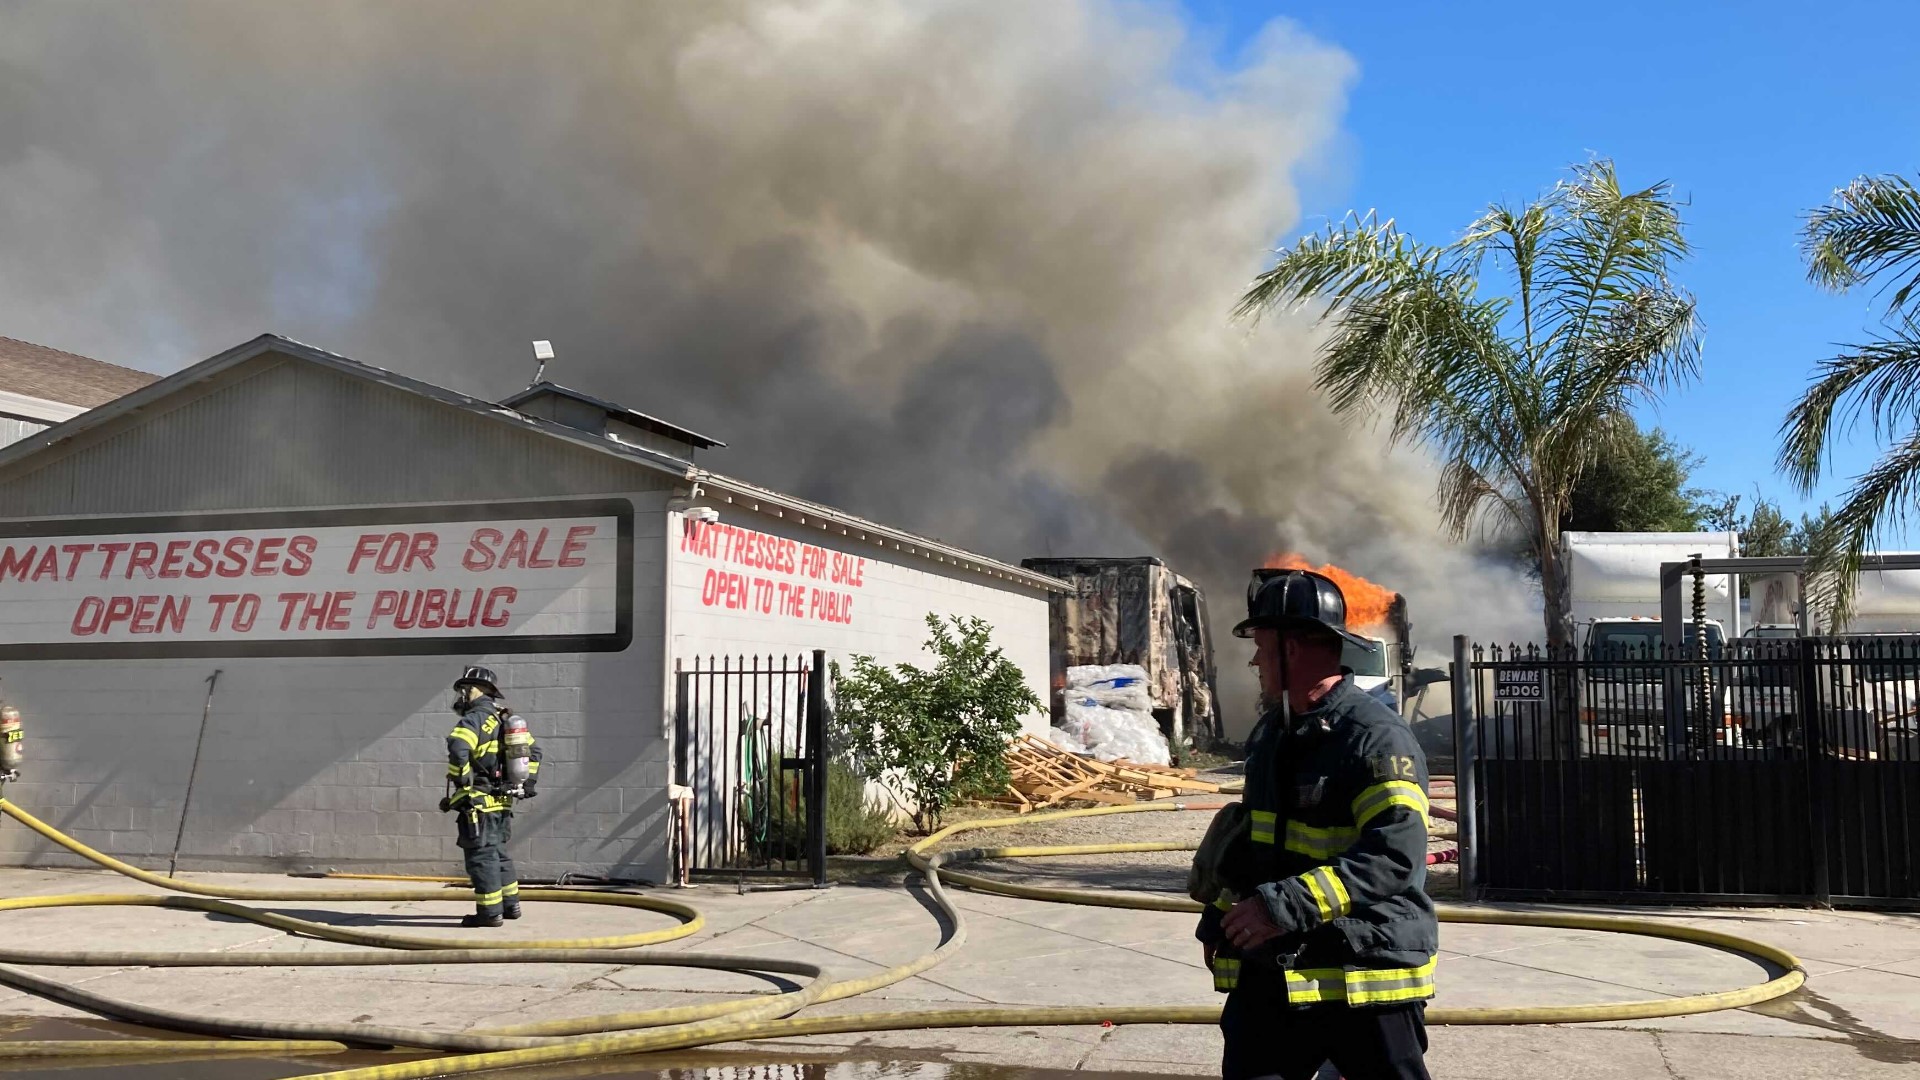 80 firefighters responded to battle flames along 14th Avenue after several tractor trailer trucks caught fire Sunday, said Captain Keith Wade.